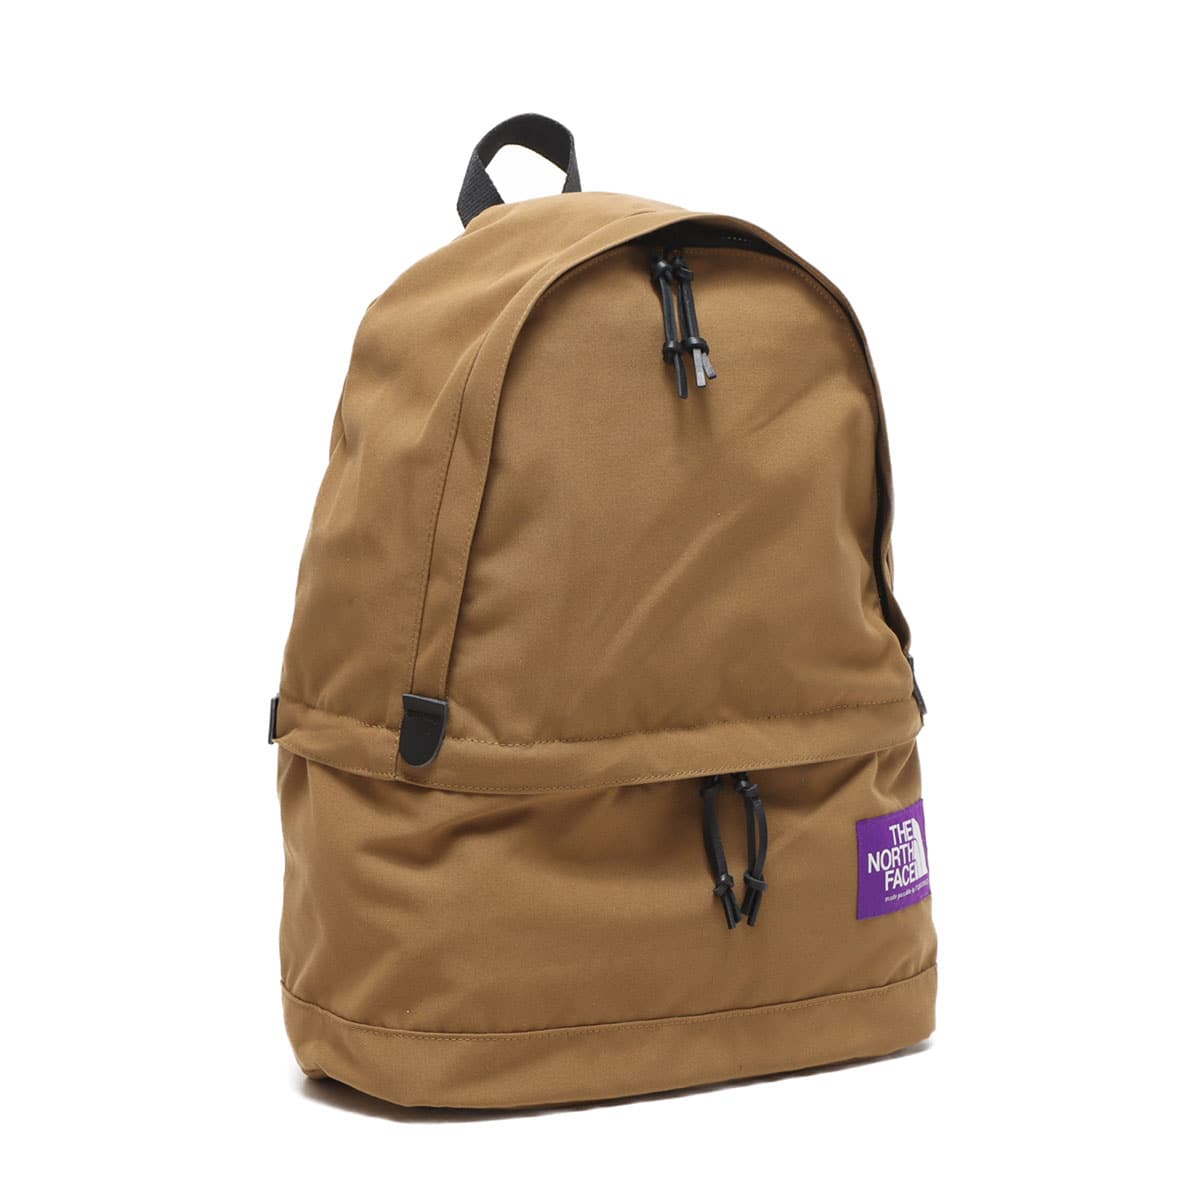 THE NORTH FACE PURPLE LABEL Field Day Pack Mocha 23FW-I